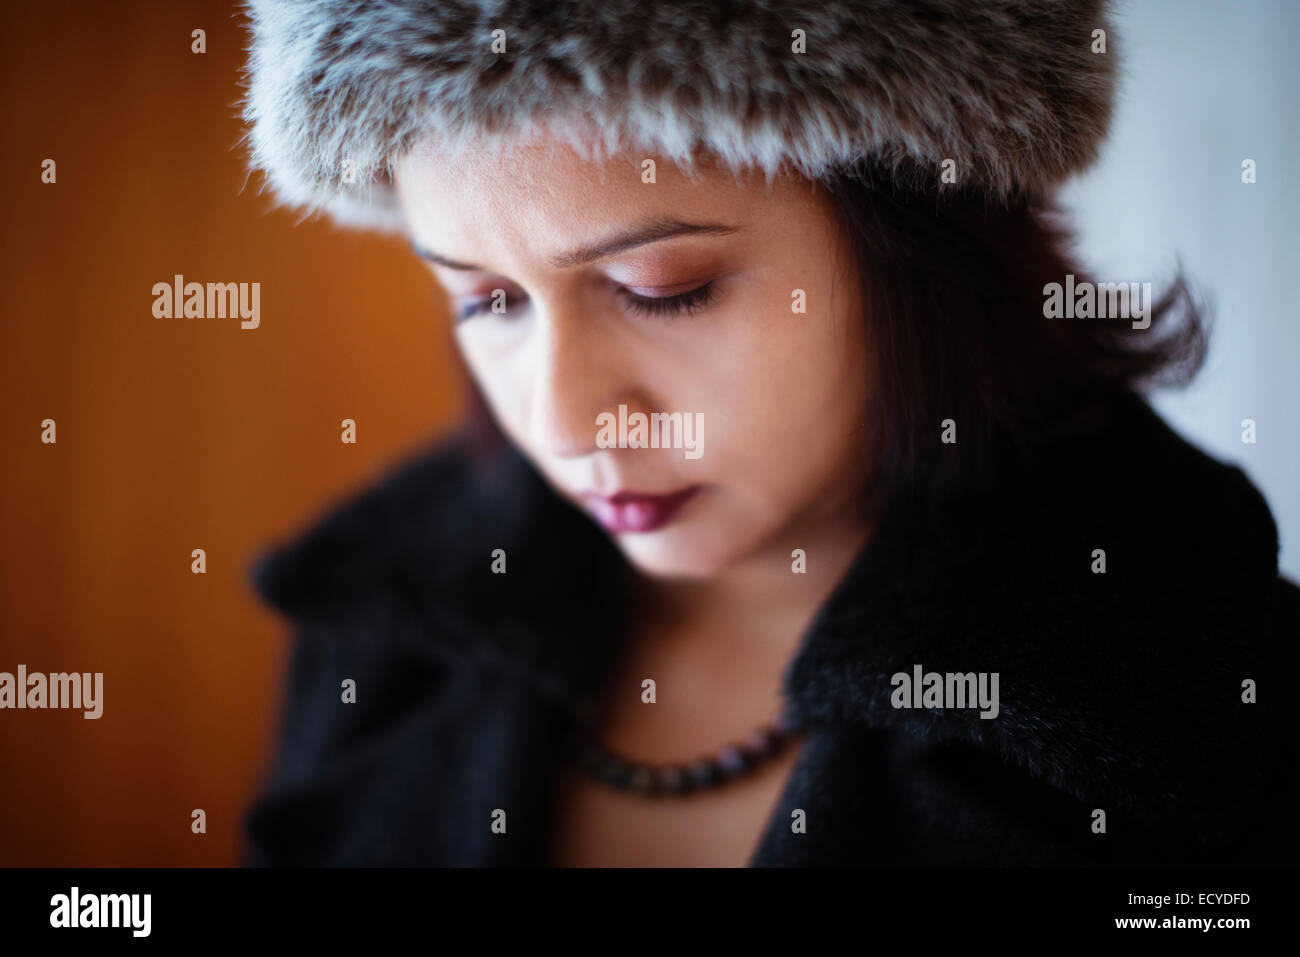 Mixed race woman wearing furry hat and coat Stock Photo